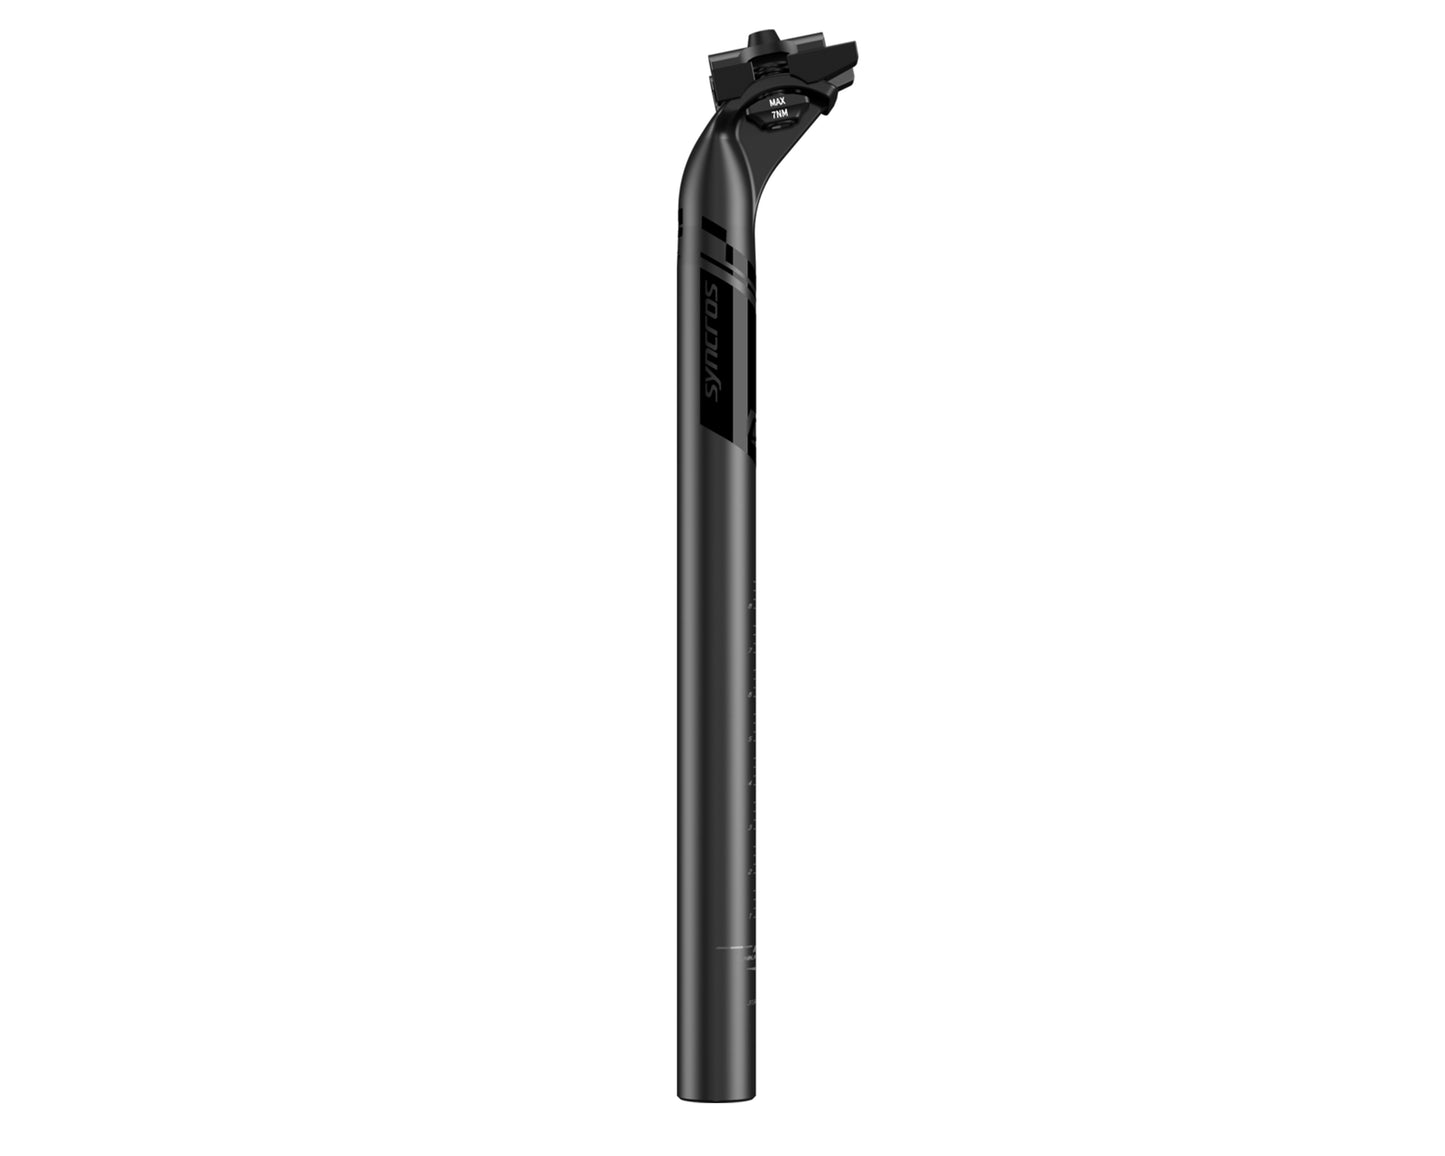 Syncros Duncan SL 25mm Offset Seatpost BlkMat 31.6